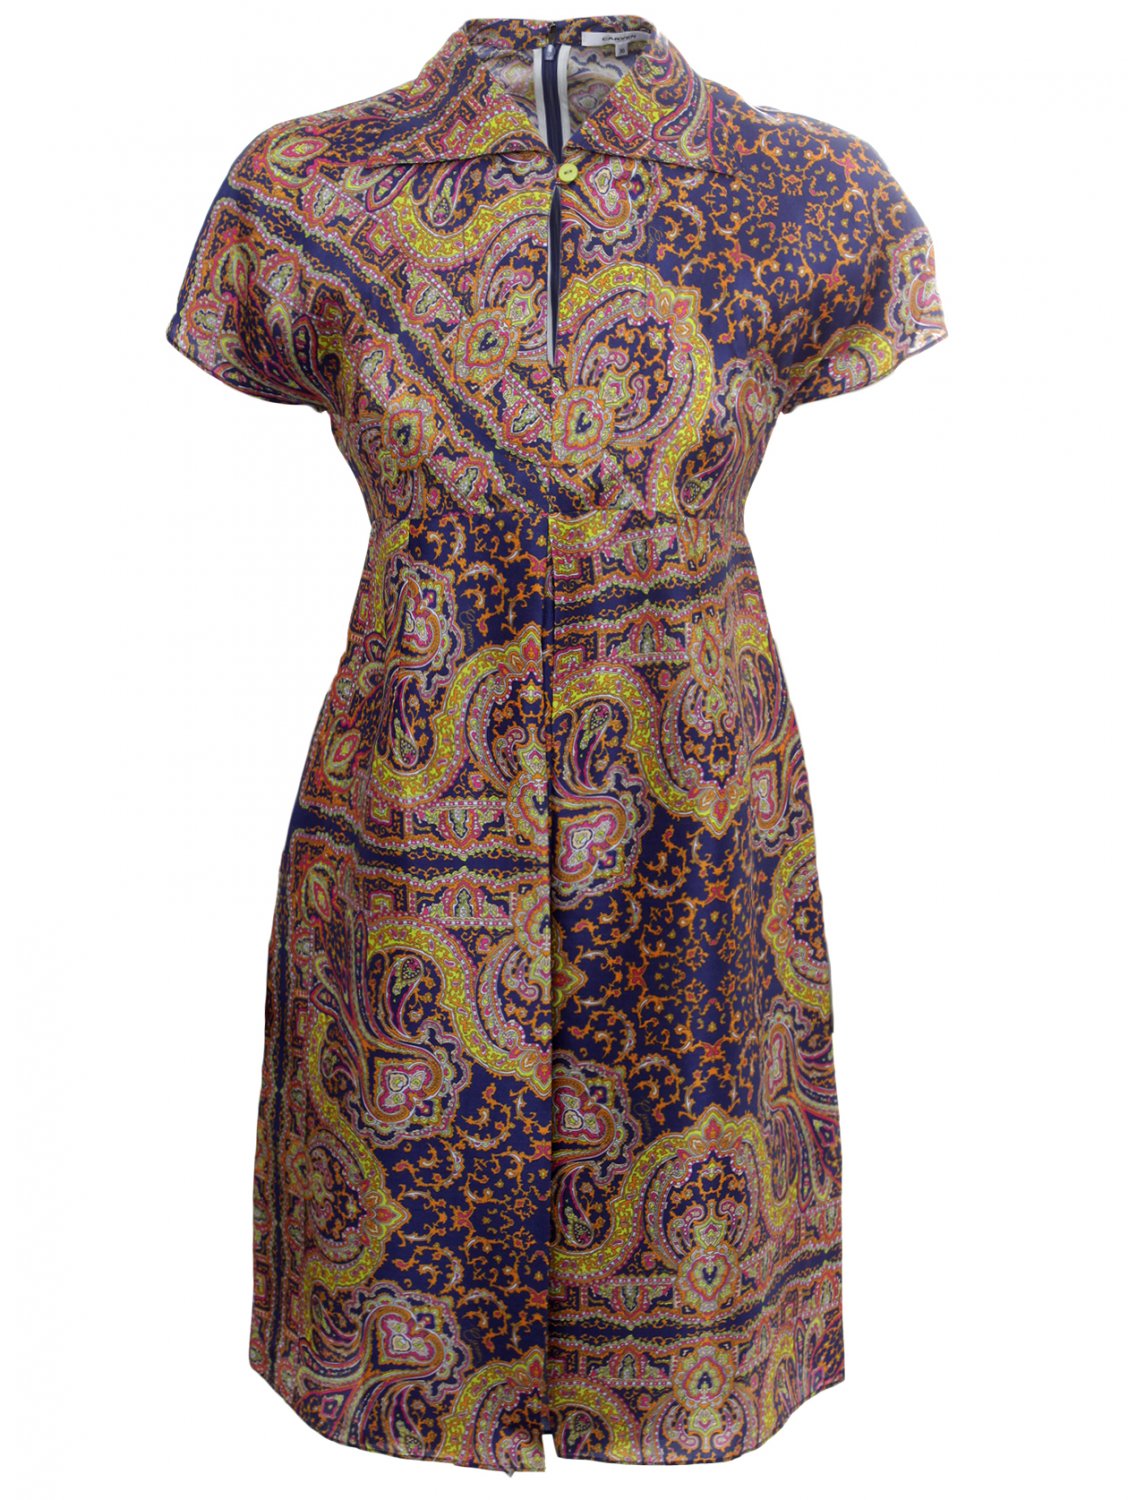 Carven Paisley Collared Silk Dress in Multicolor | Lyst